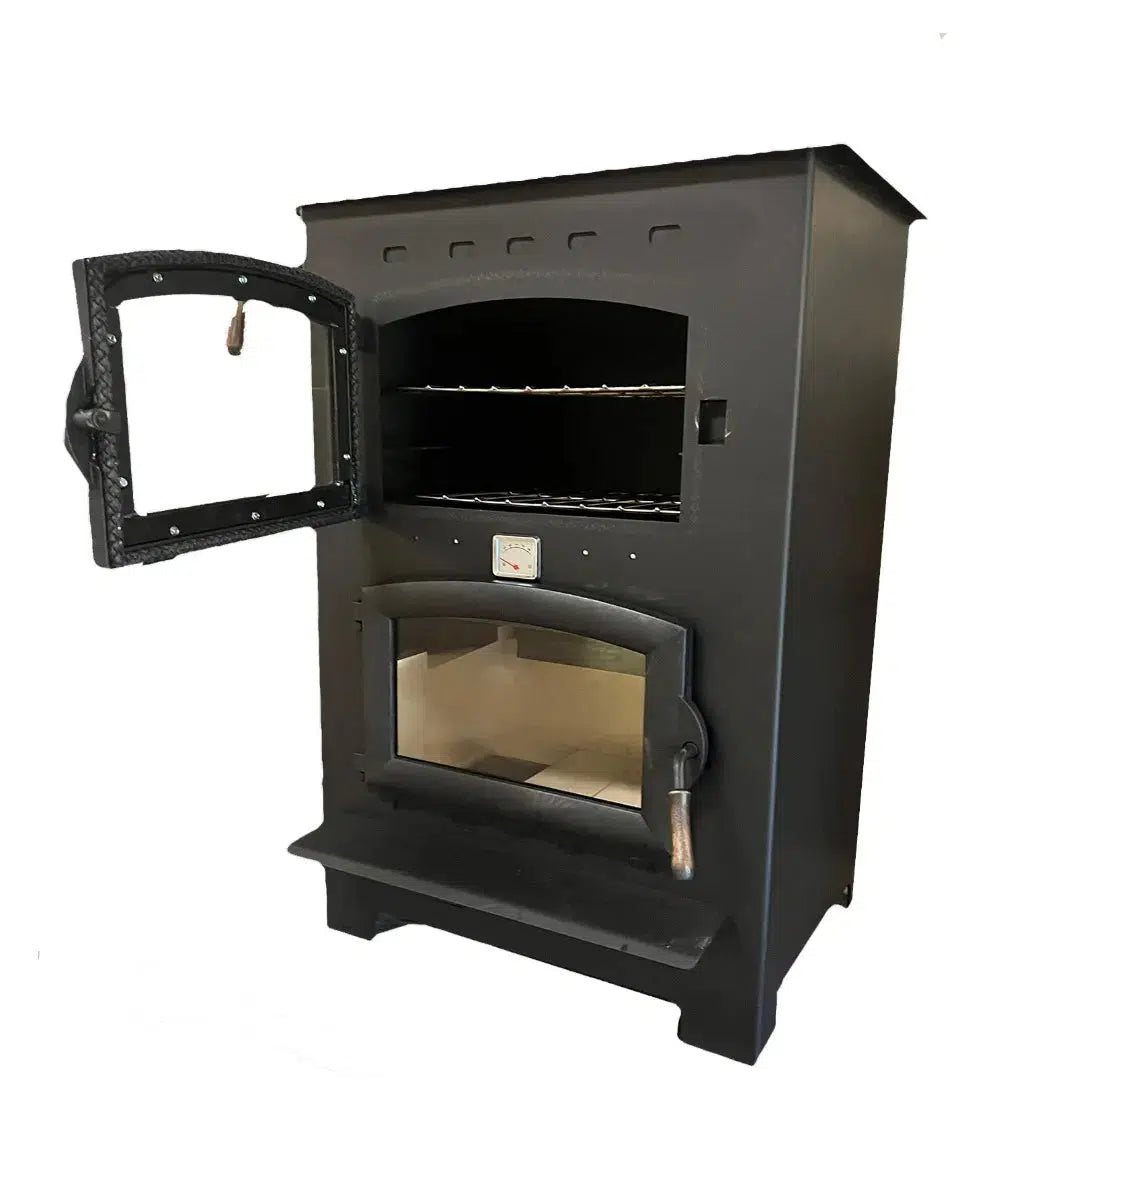 Baking with a Wood Stove OVEN 